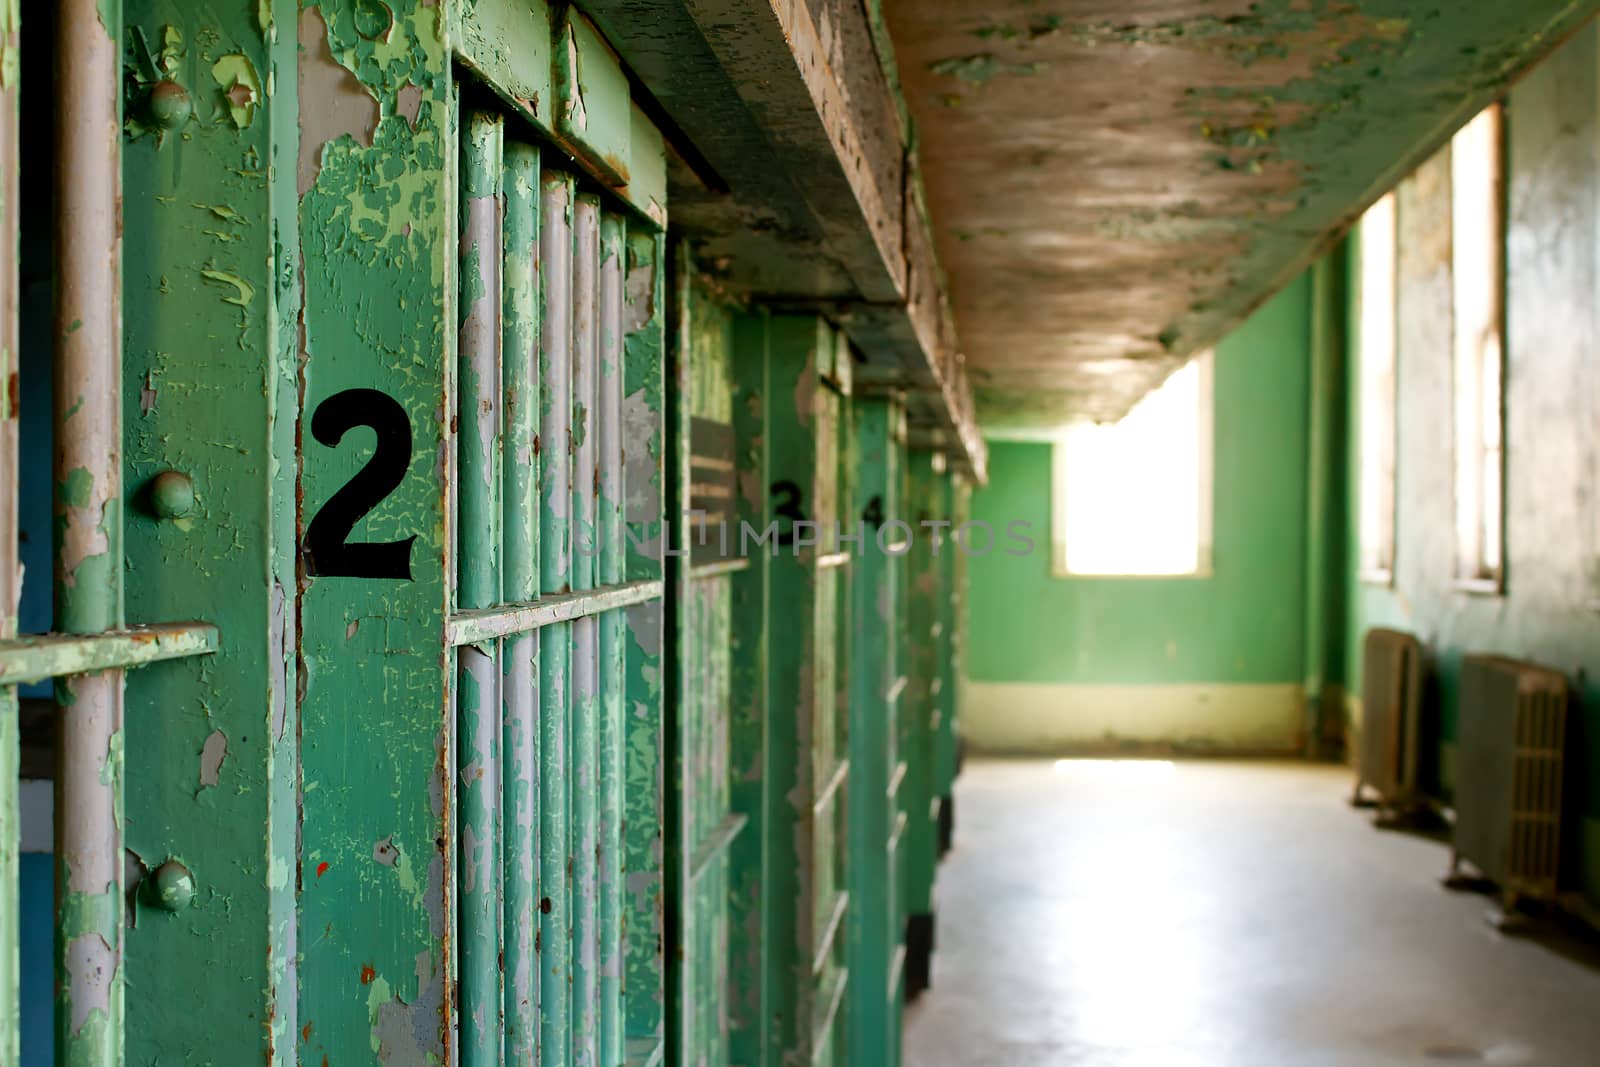 Shallow depth of field on a historic prison old worn down jail cells. focus on number 2.